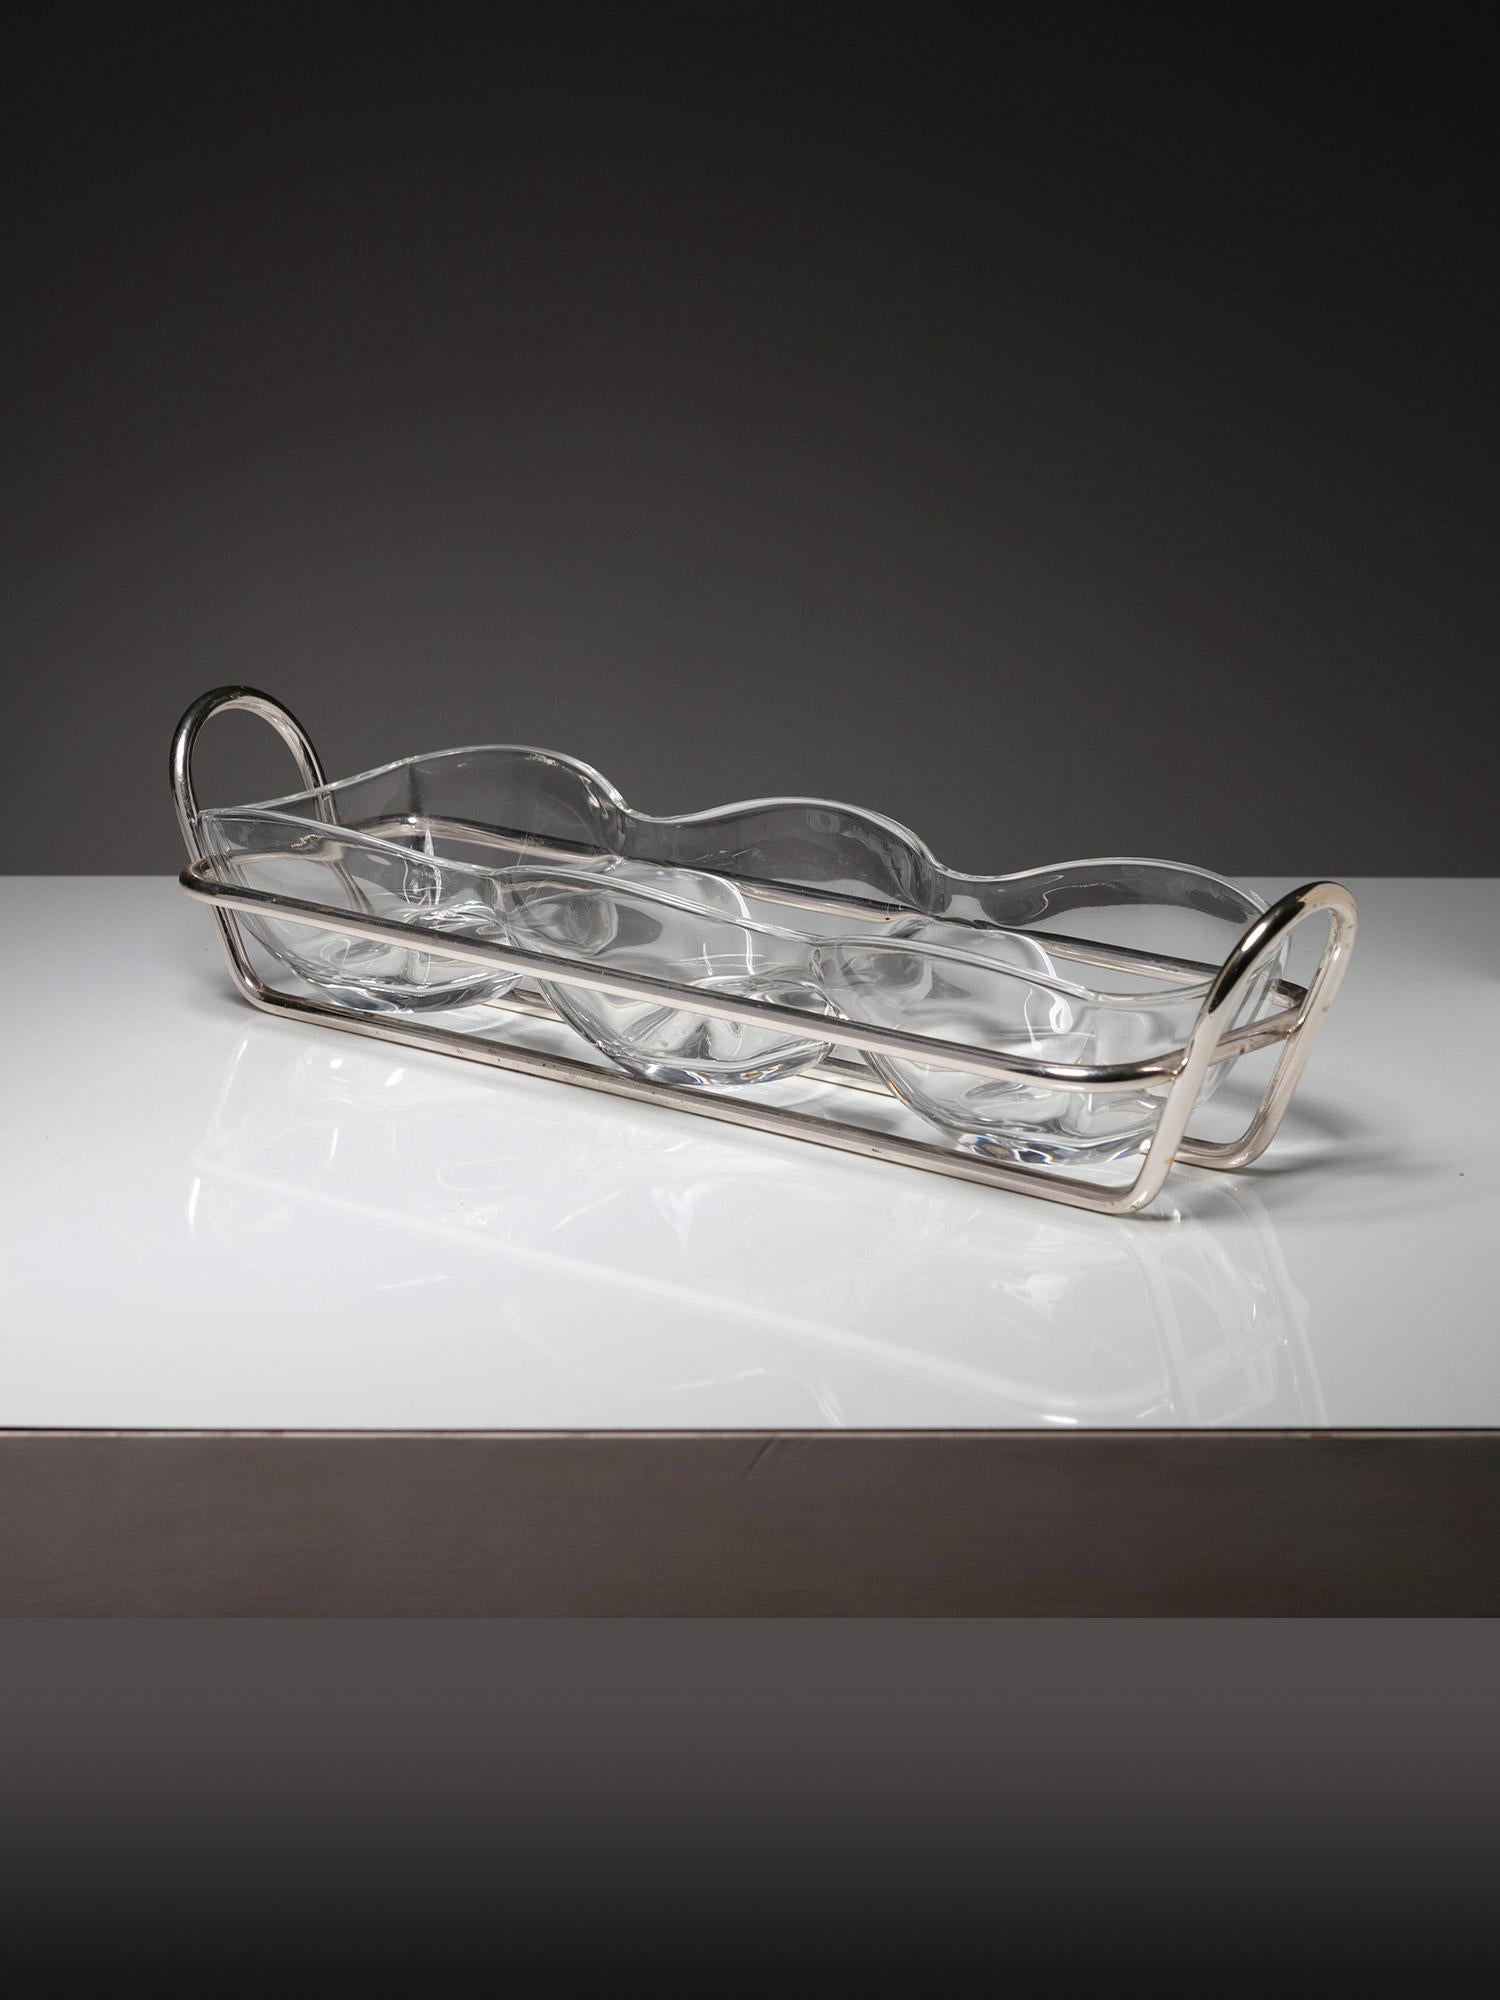 Pair of serving pieces by Lino Sabattini for Sabattini Argenteria.
Thin silver plated frame supporting glass tray and bowls.
Size refers to the large piece.